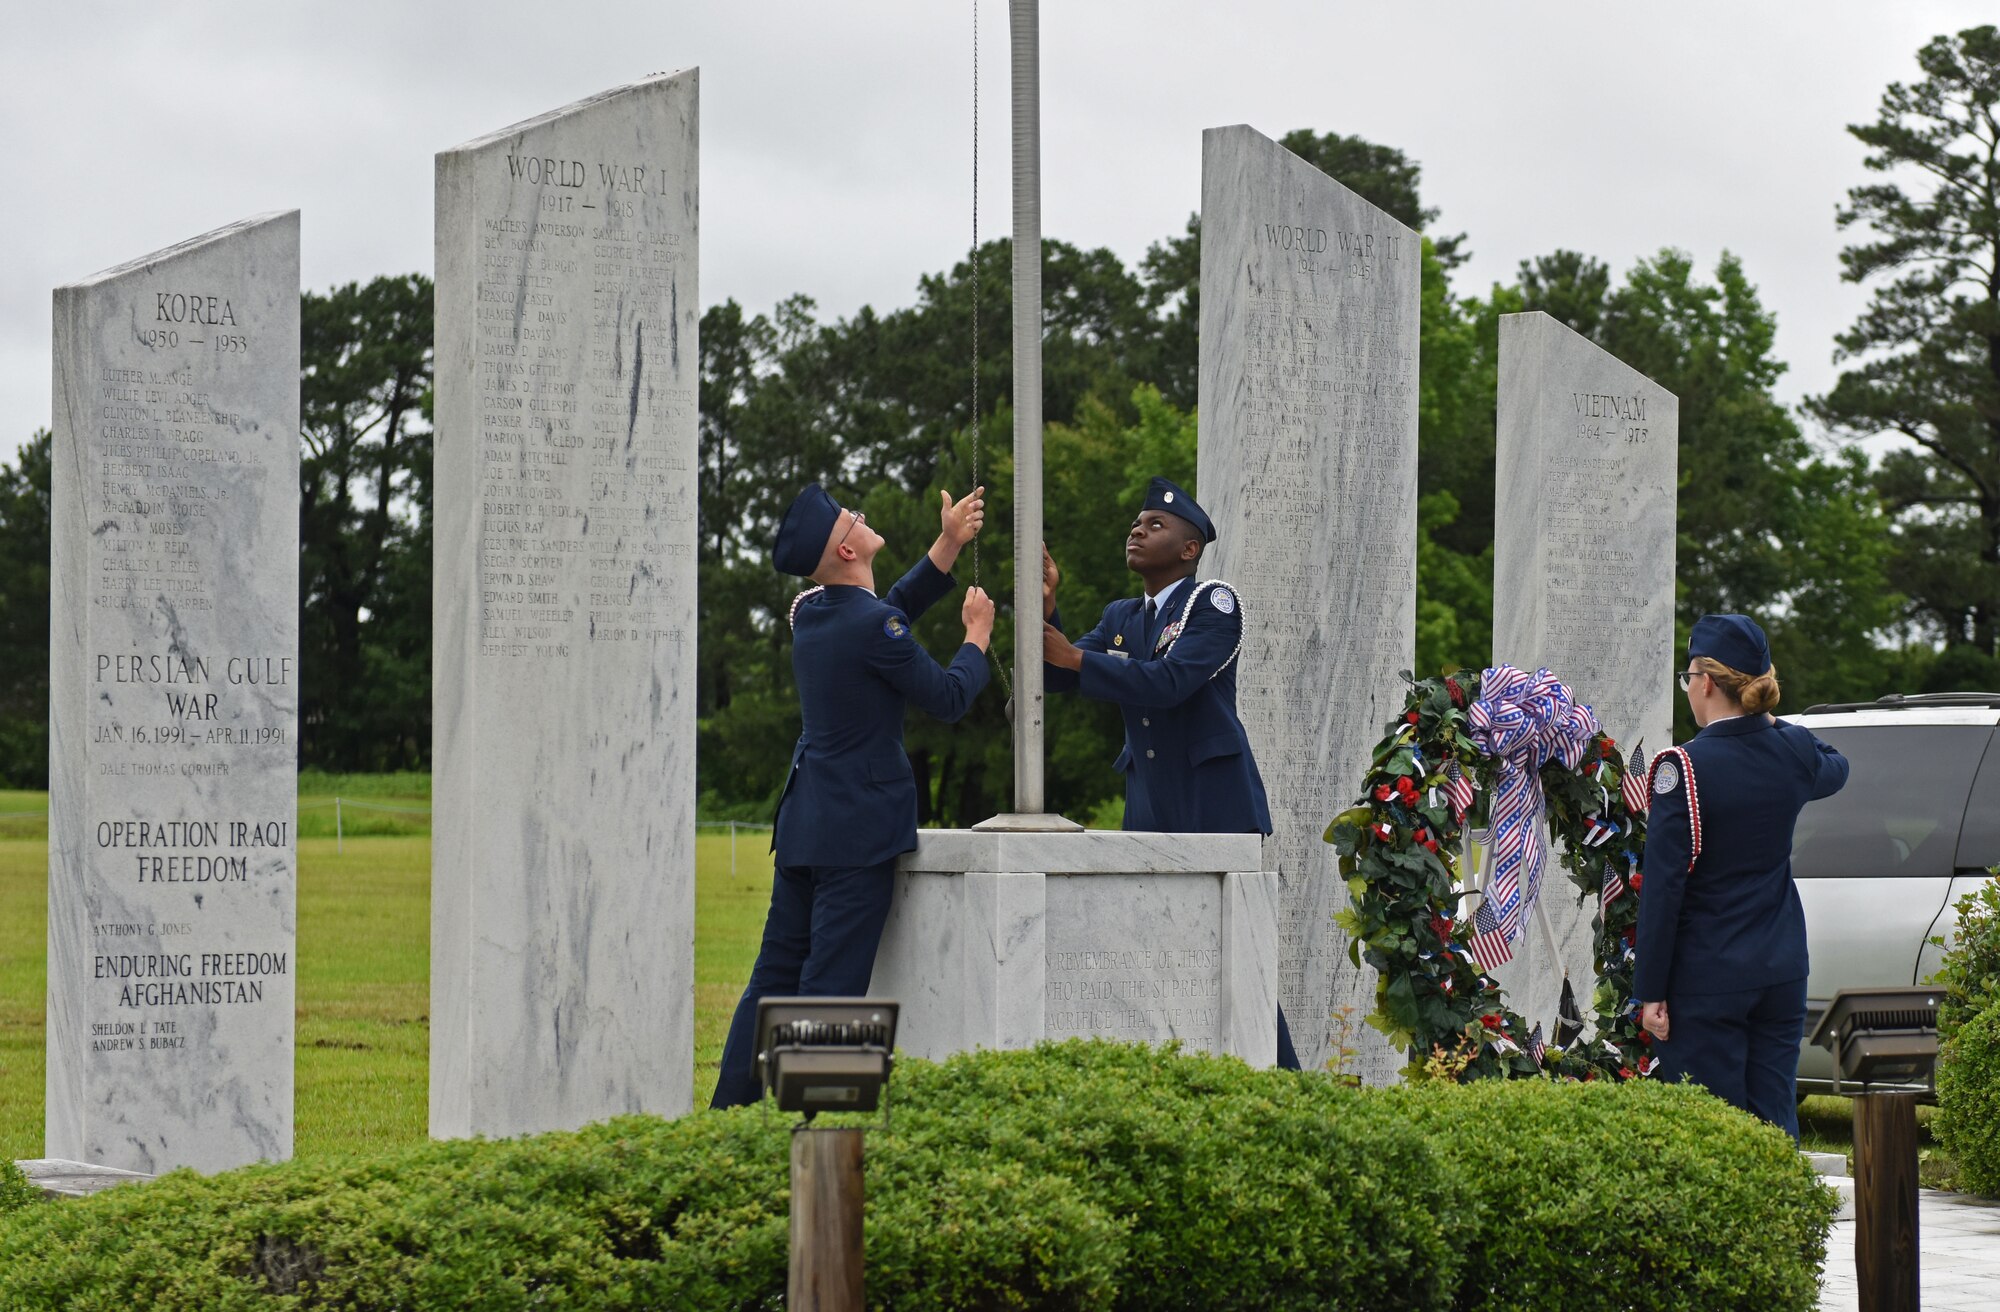 Sumter Air Force Junior Reserve Officers’ Training Corps members perform a Memorial Wreath Ceremony at Sumter Shaw Park, Sumter, S.C., May 28, 2018.